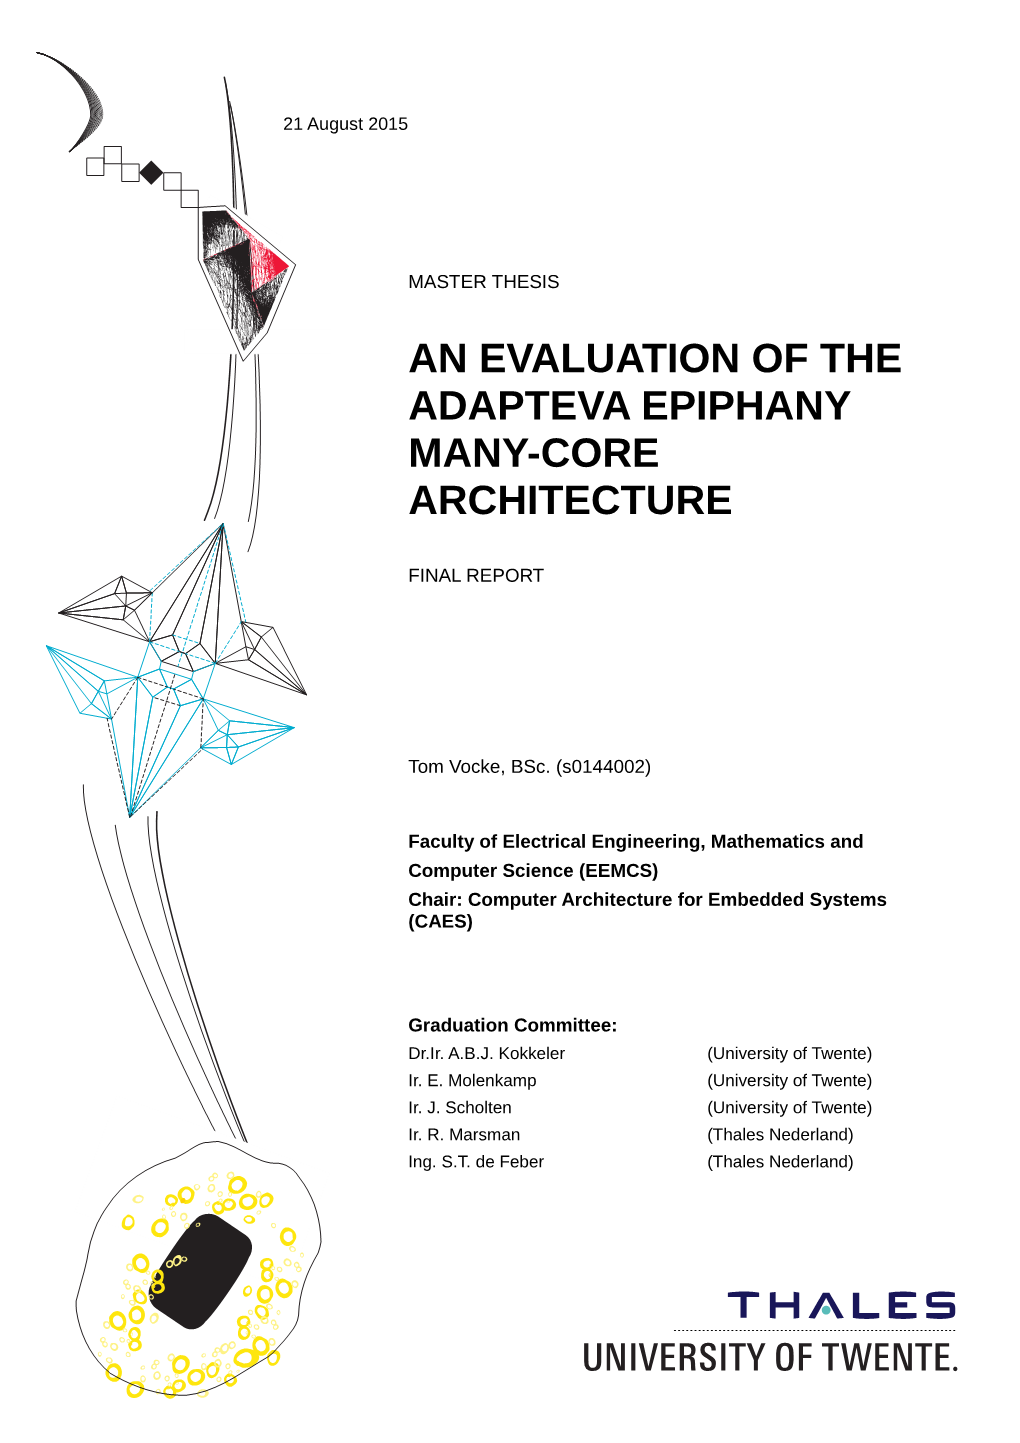 An Evaluation of the Adapteva Epiphany Many-Core Architecture